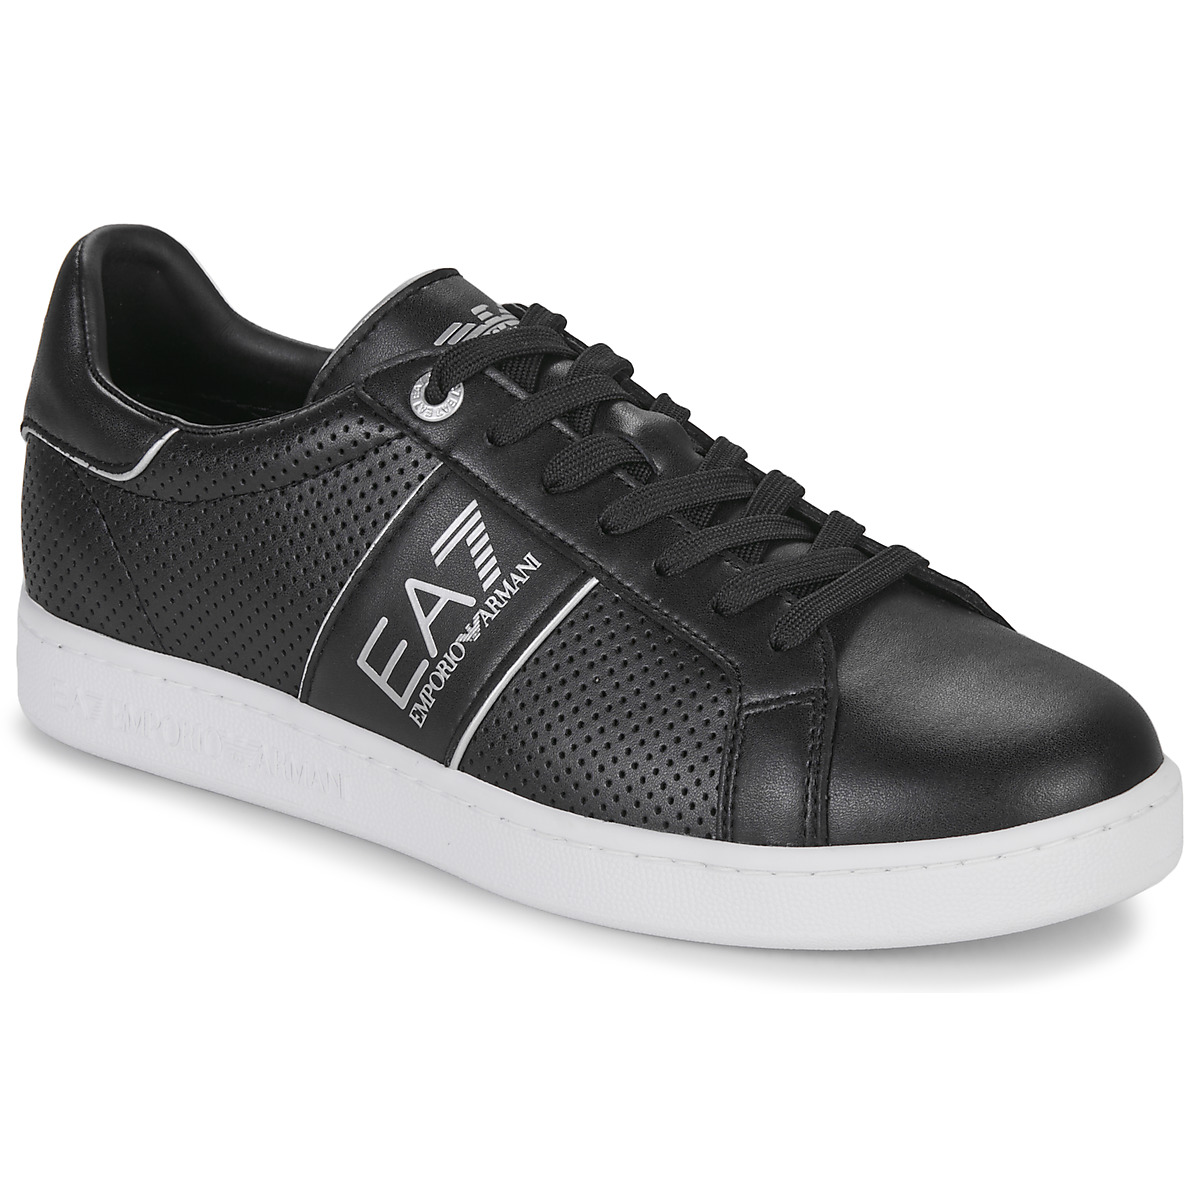 Emporio Armani EA7 CLASSIC NEW CC Black - Free delivery | Spartoo UK ! -  Shoes Low top trainers £ 150.00